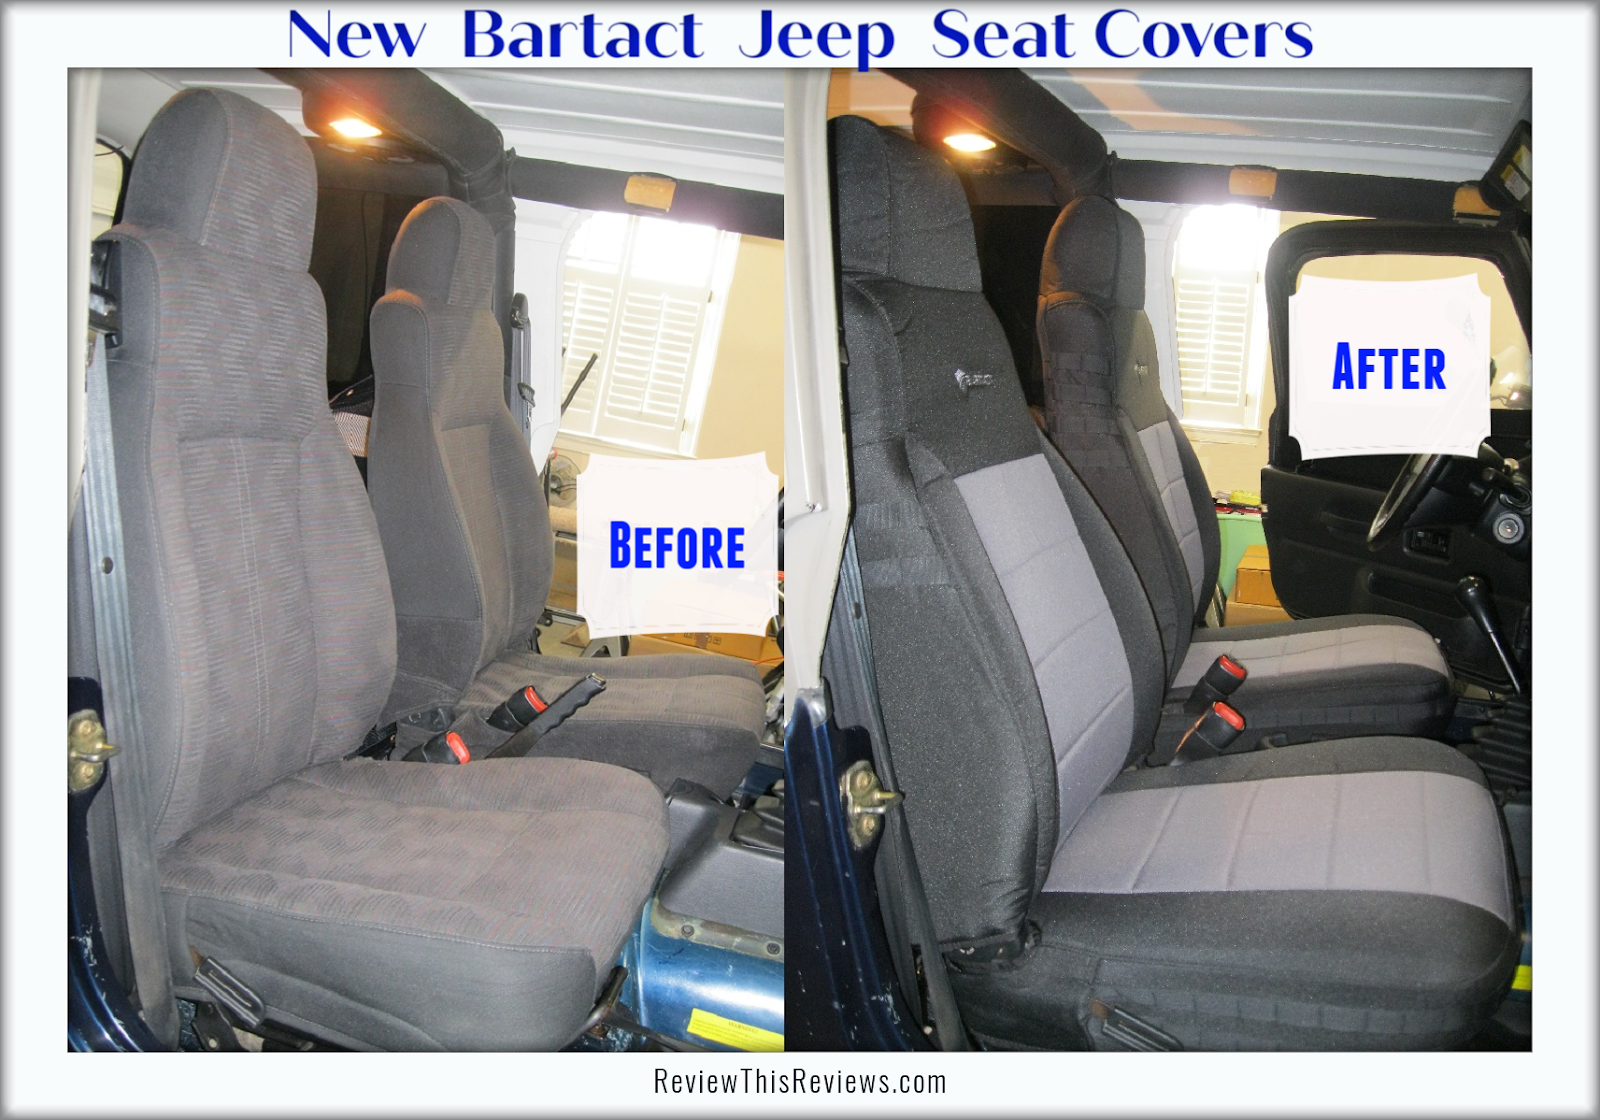 Bartact Mil-Spec Super Seat Covers for Jeep Wranglers Reviewed